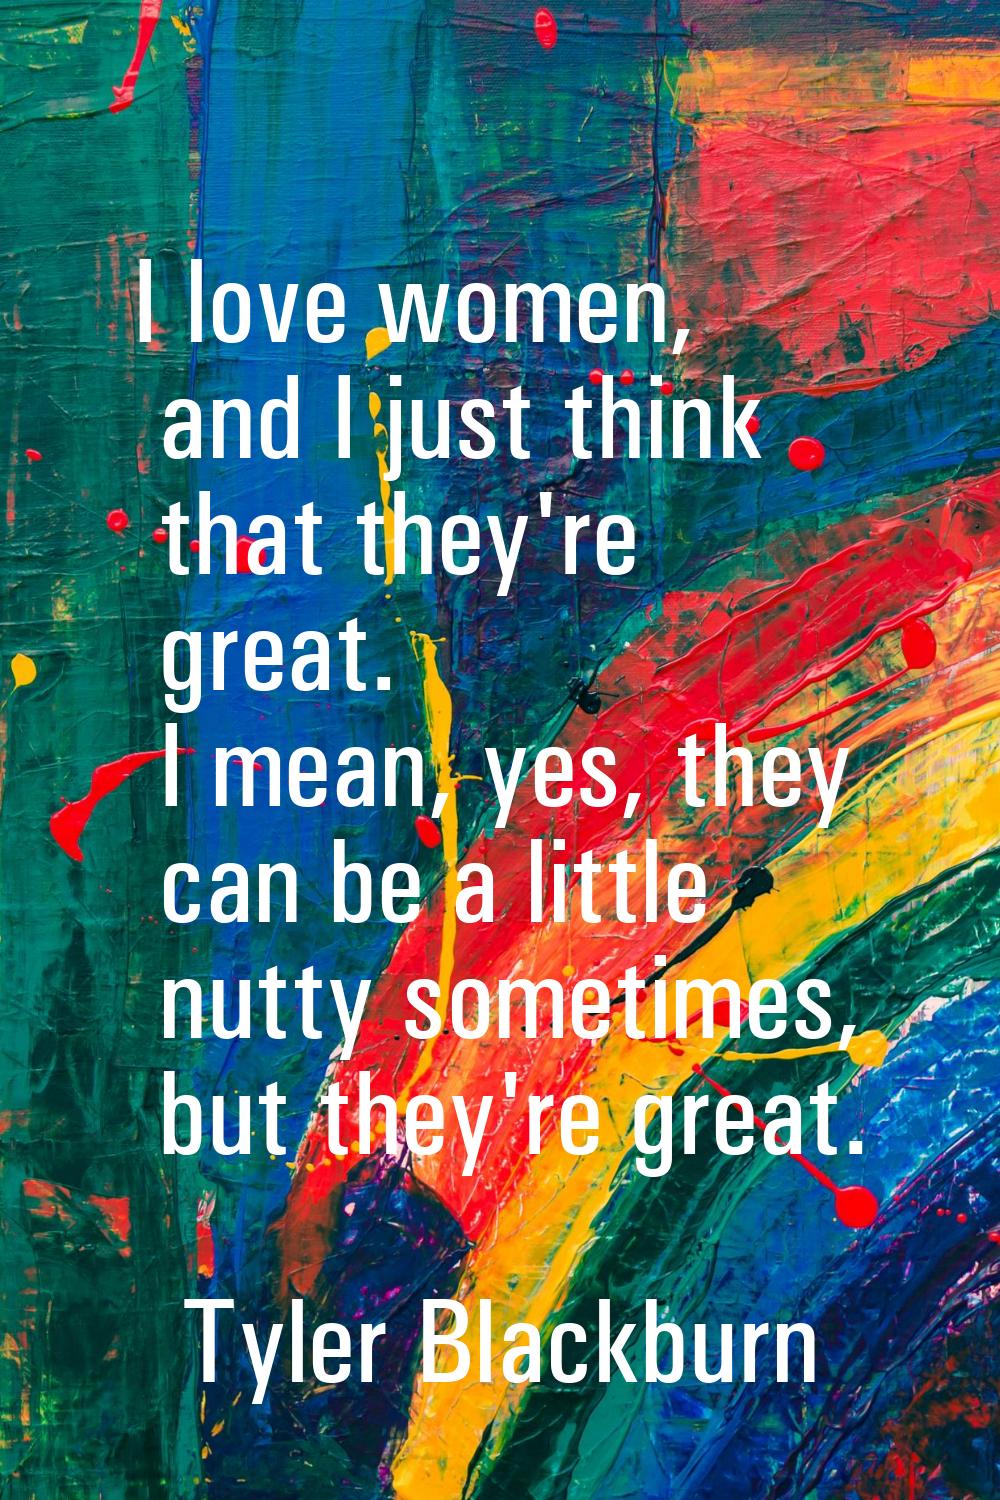 I love women, and I just think that they're great. I mean, yes, they can be a little nutty sometime